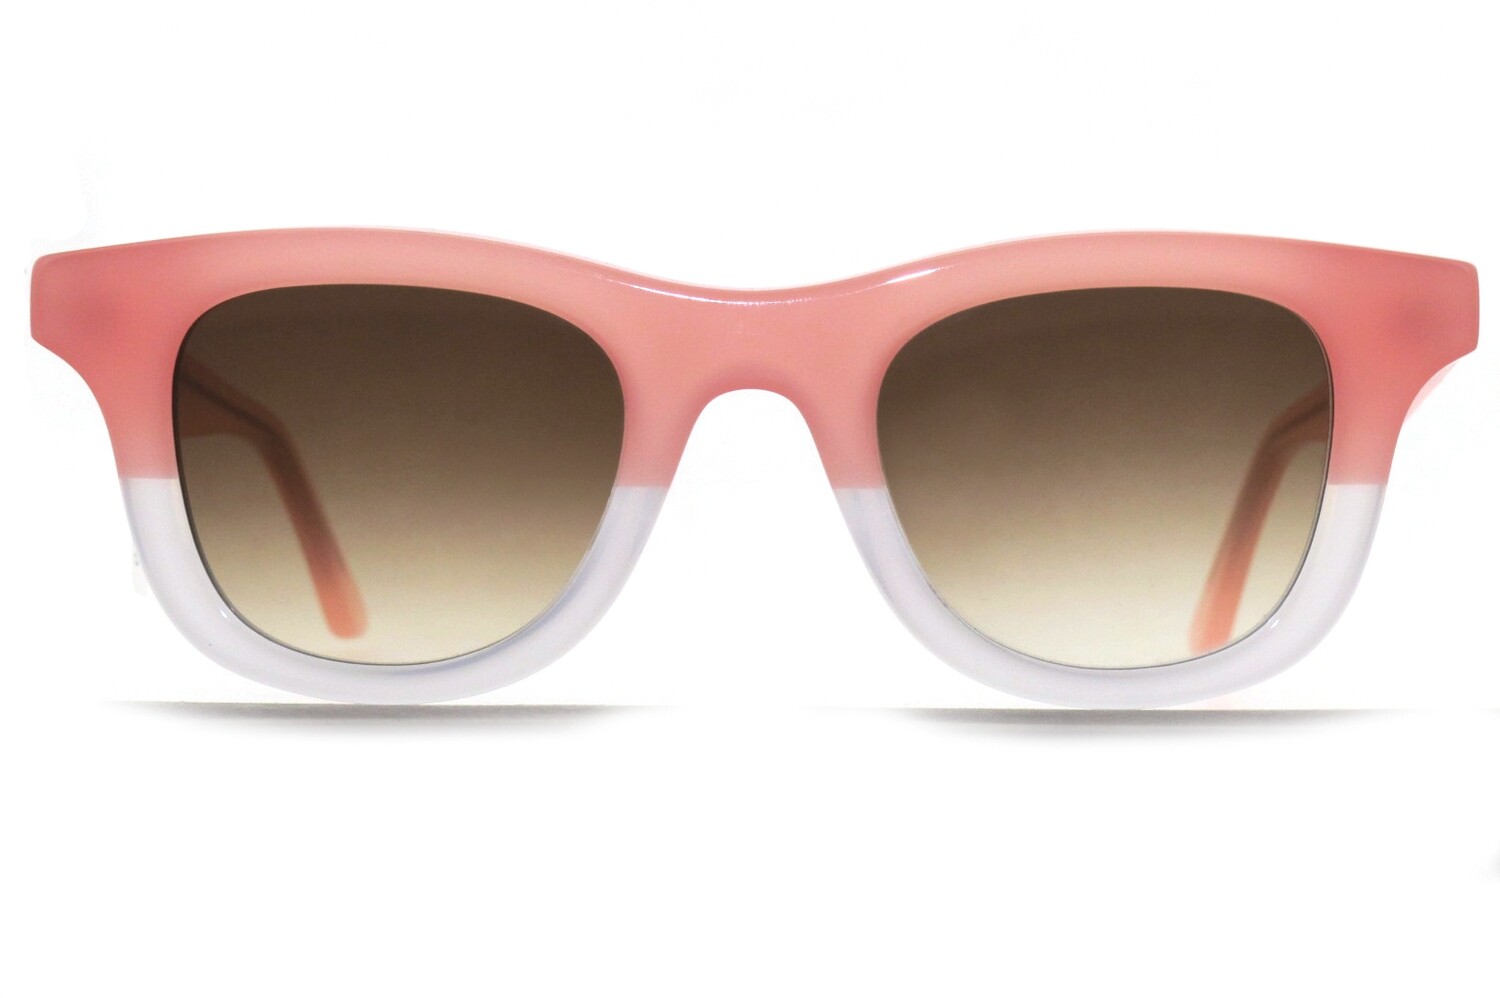 Creepers by Thierry Lasry